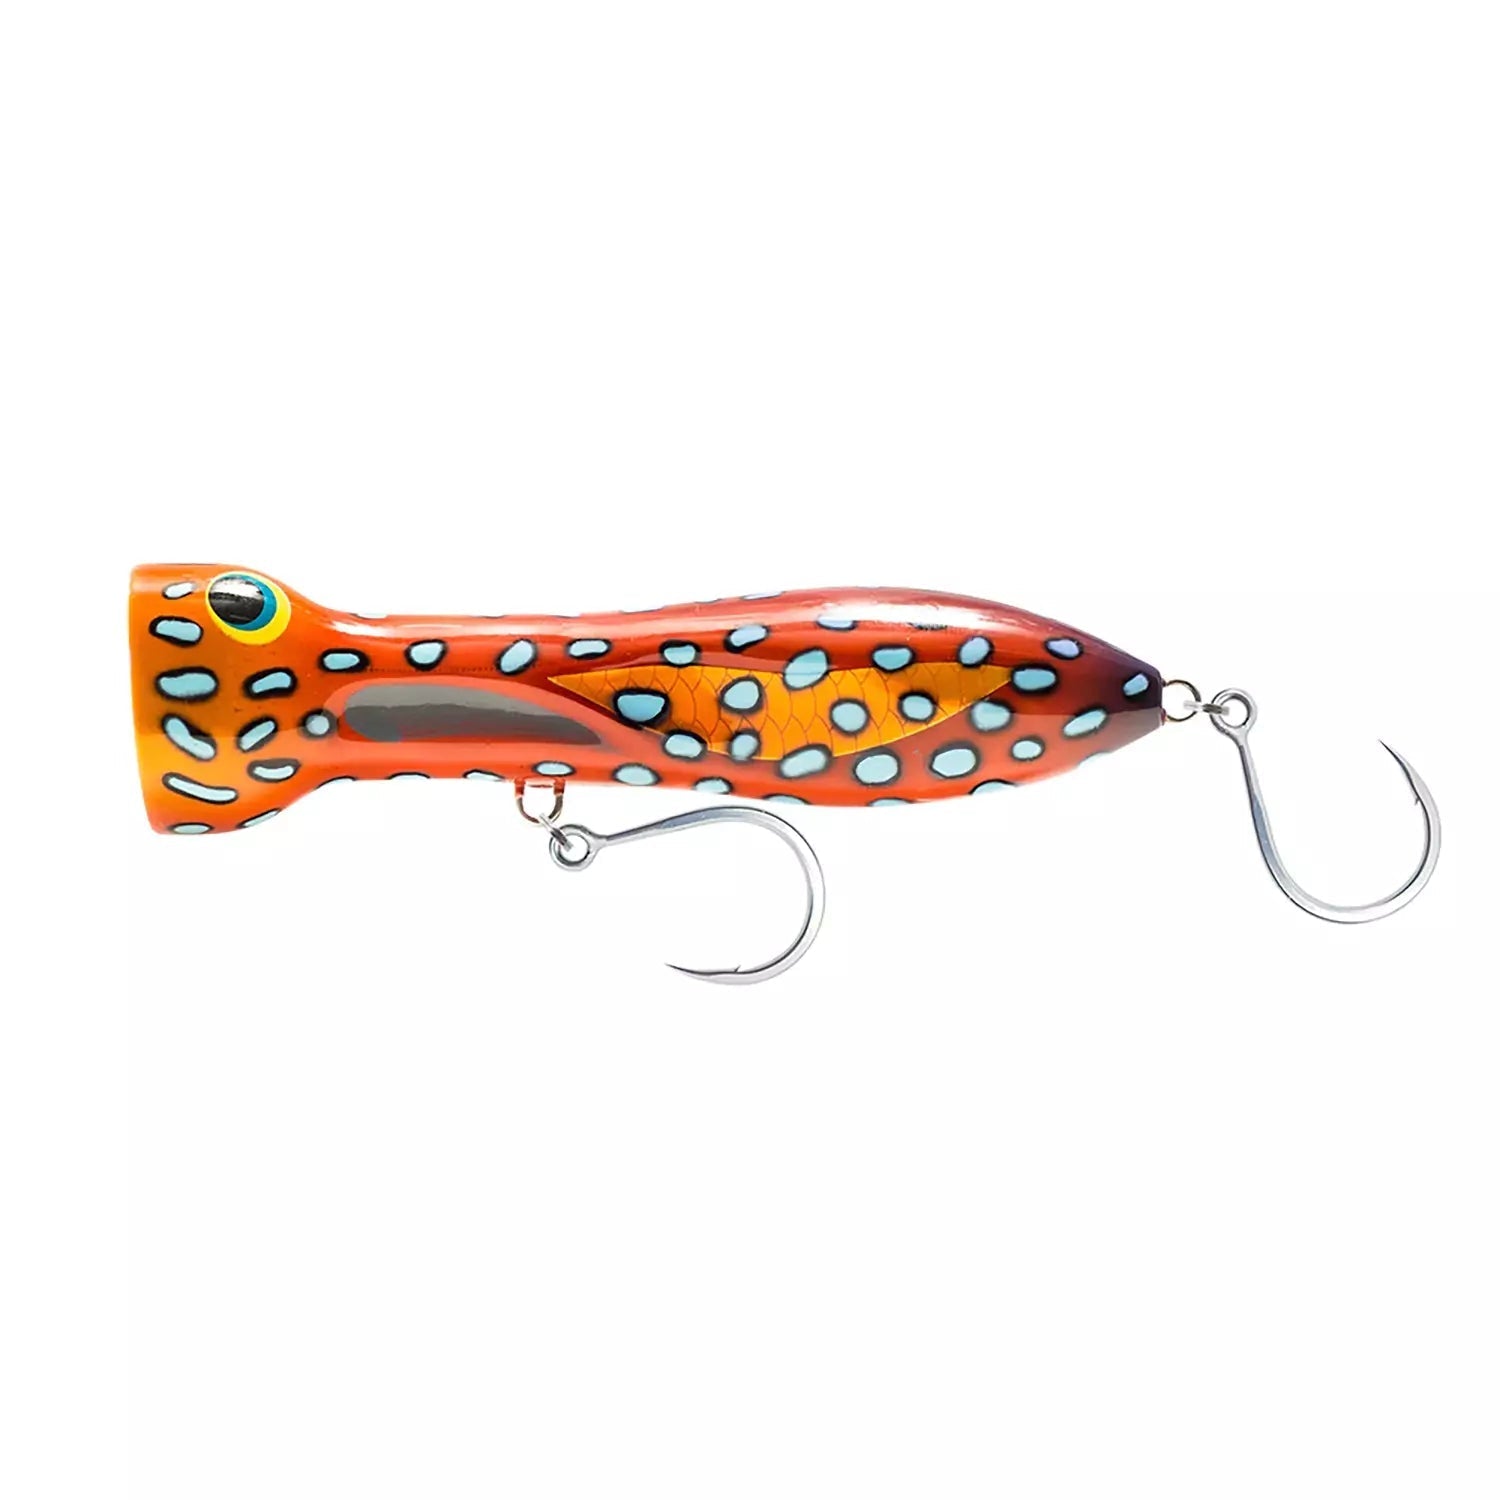 Nomad Design Chug Norris Popper-Lure - Poppers, Stickbaits & Pencils-Nomad-180mm-Coral Trout-Fishing Station